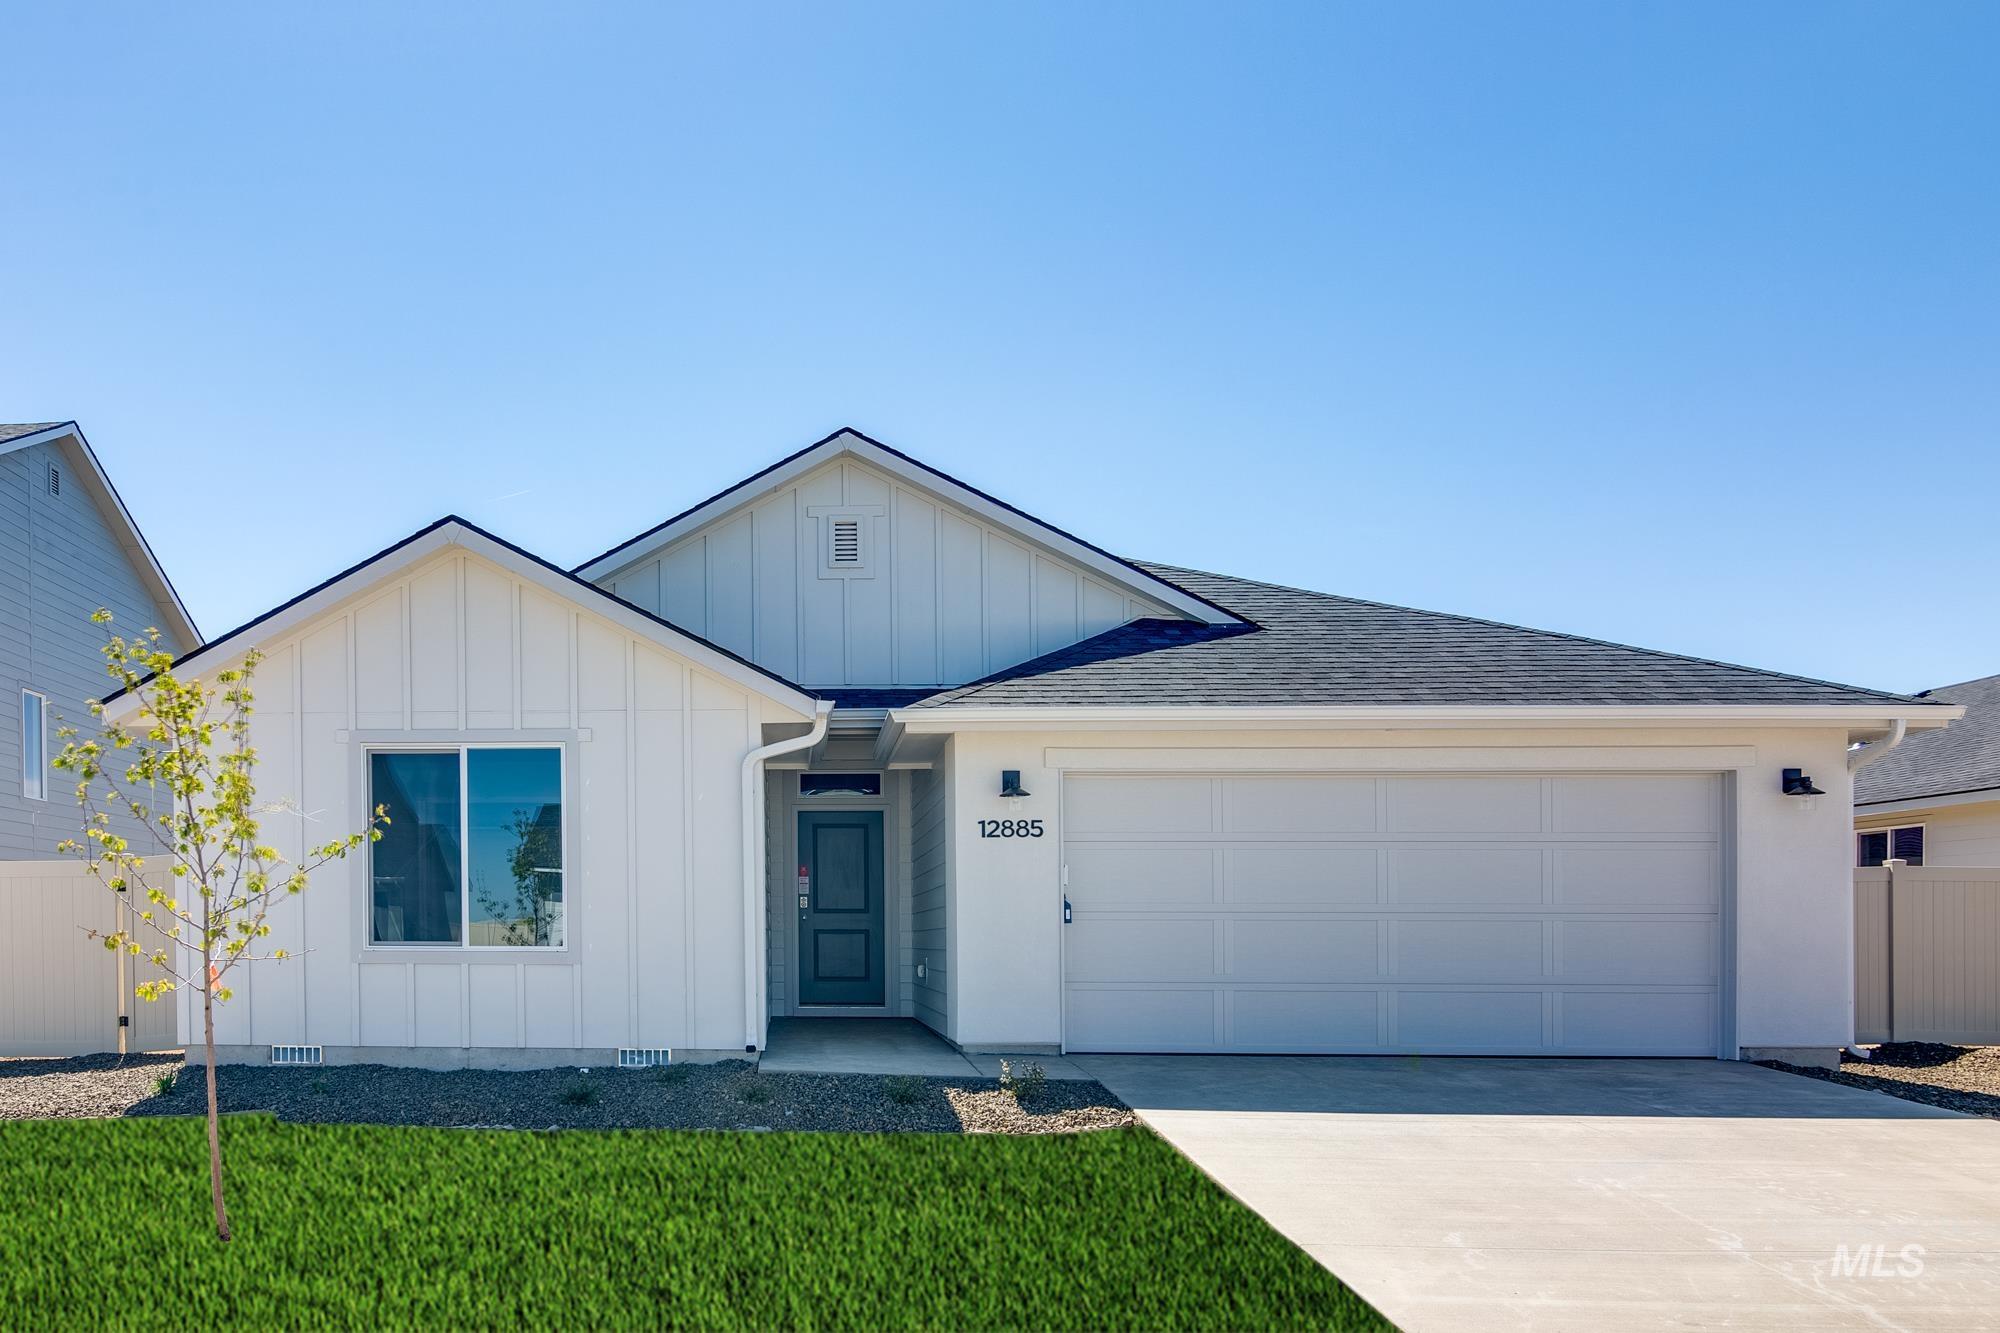 12765 Dovekie St., Nampa, Idaho 83651, 4 Bedrooms, 2 Bathrooms, Residential For Sale, Price $407,990,MLS 98908547